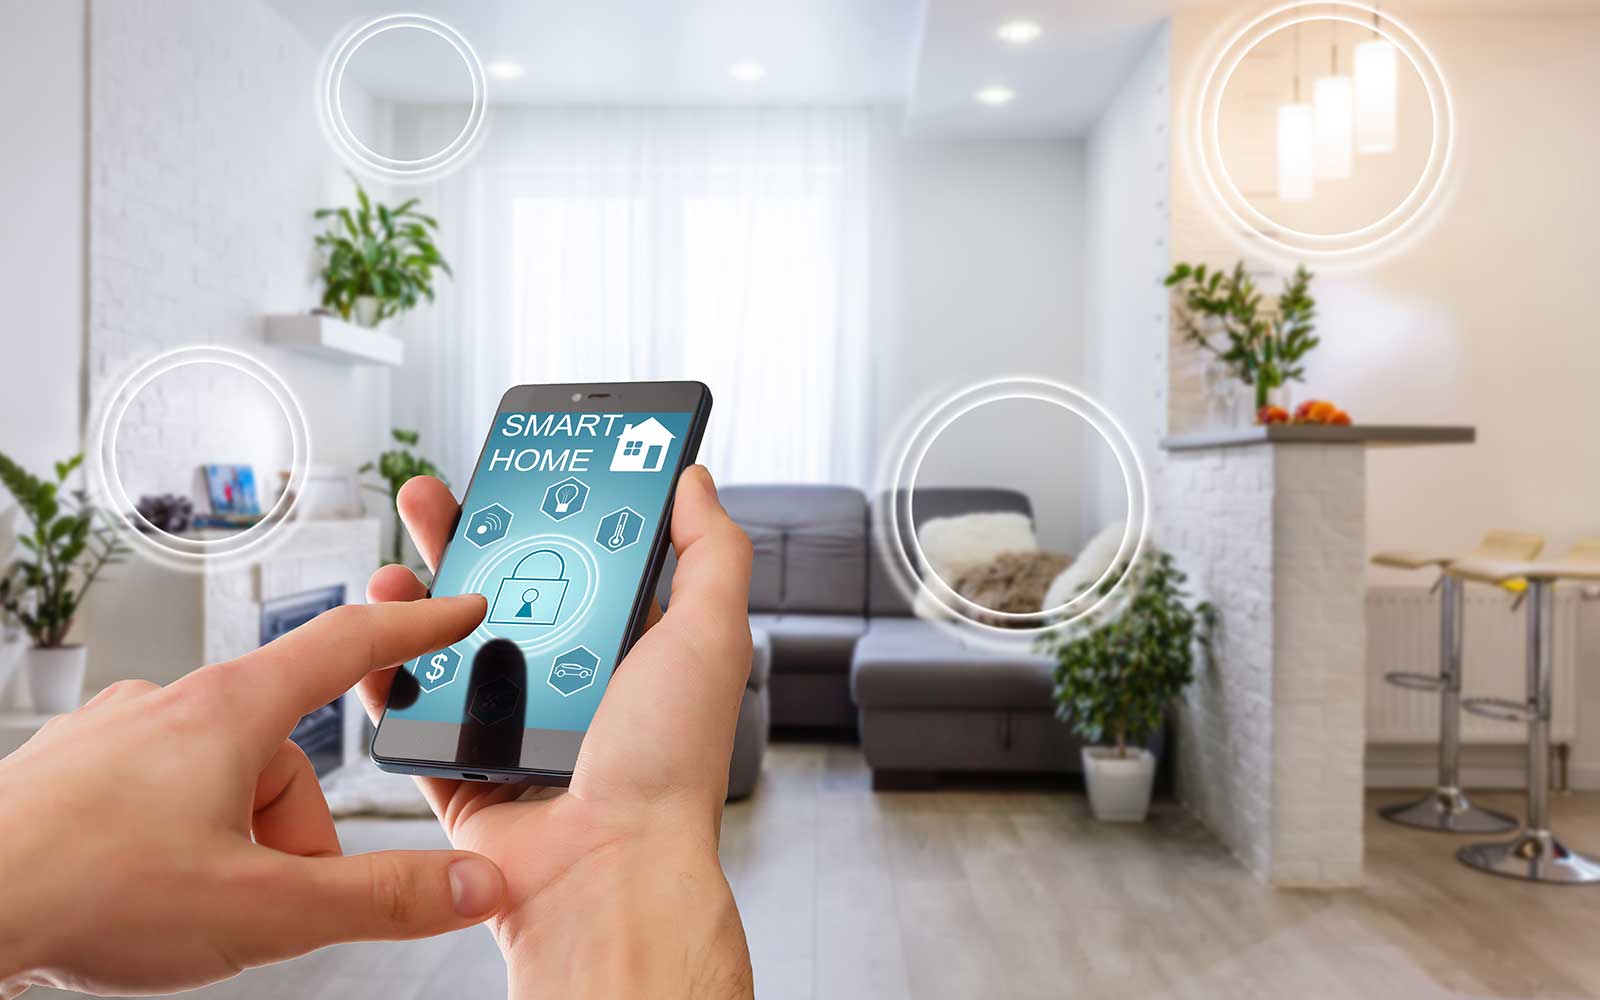 Transforming Living Spaces: Smart Home Trends to Watch